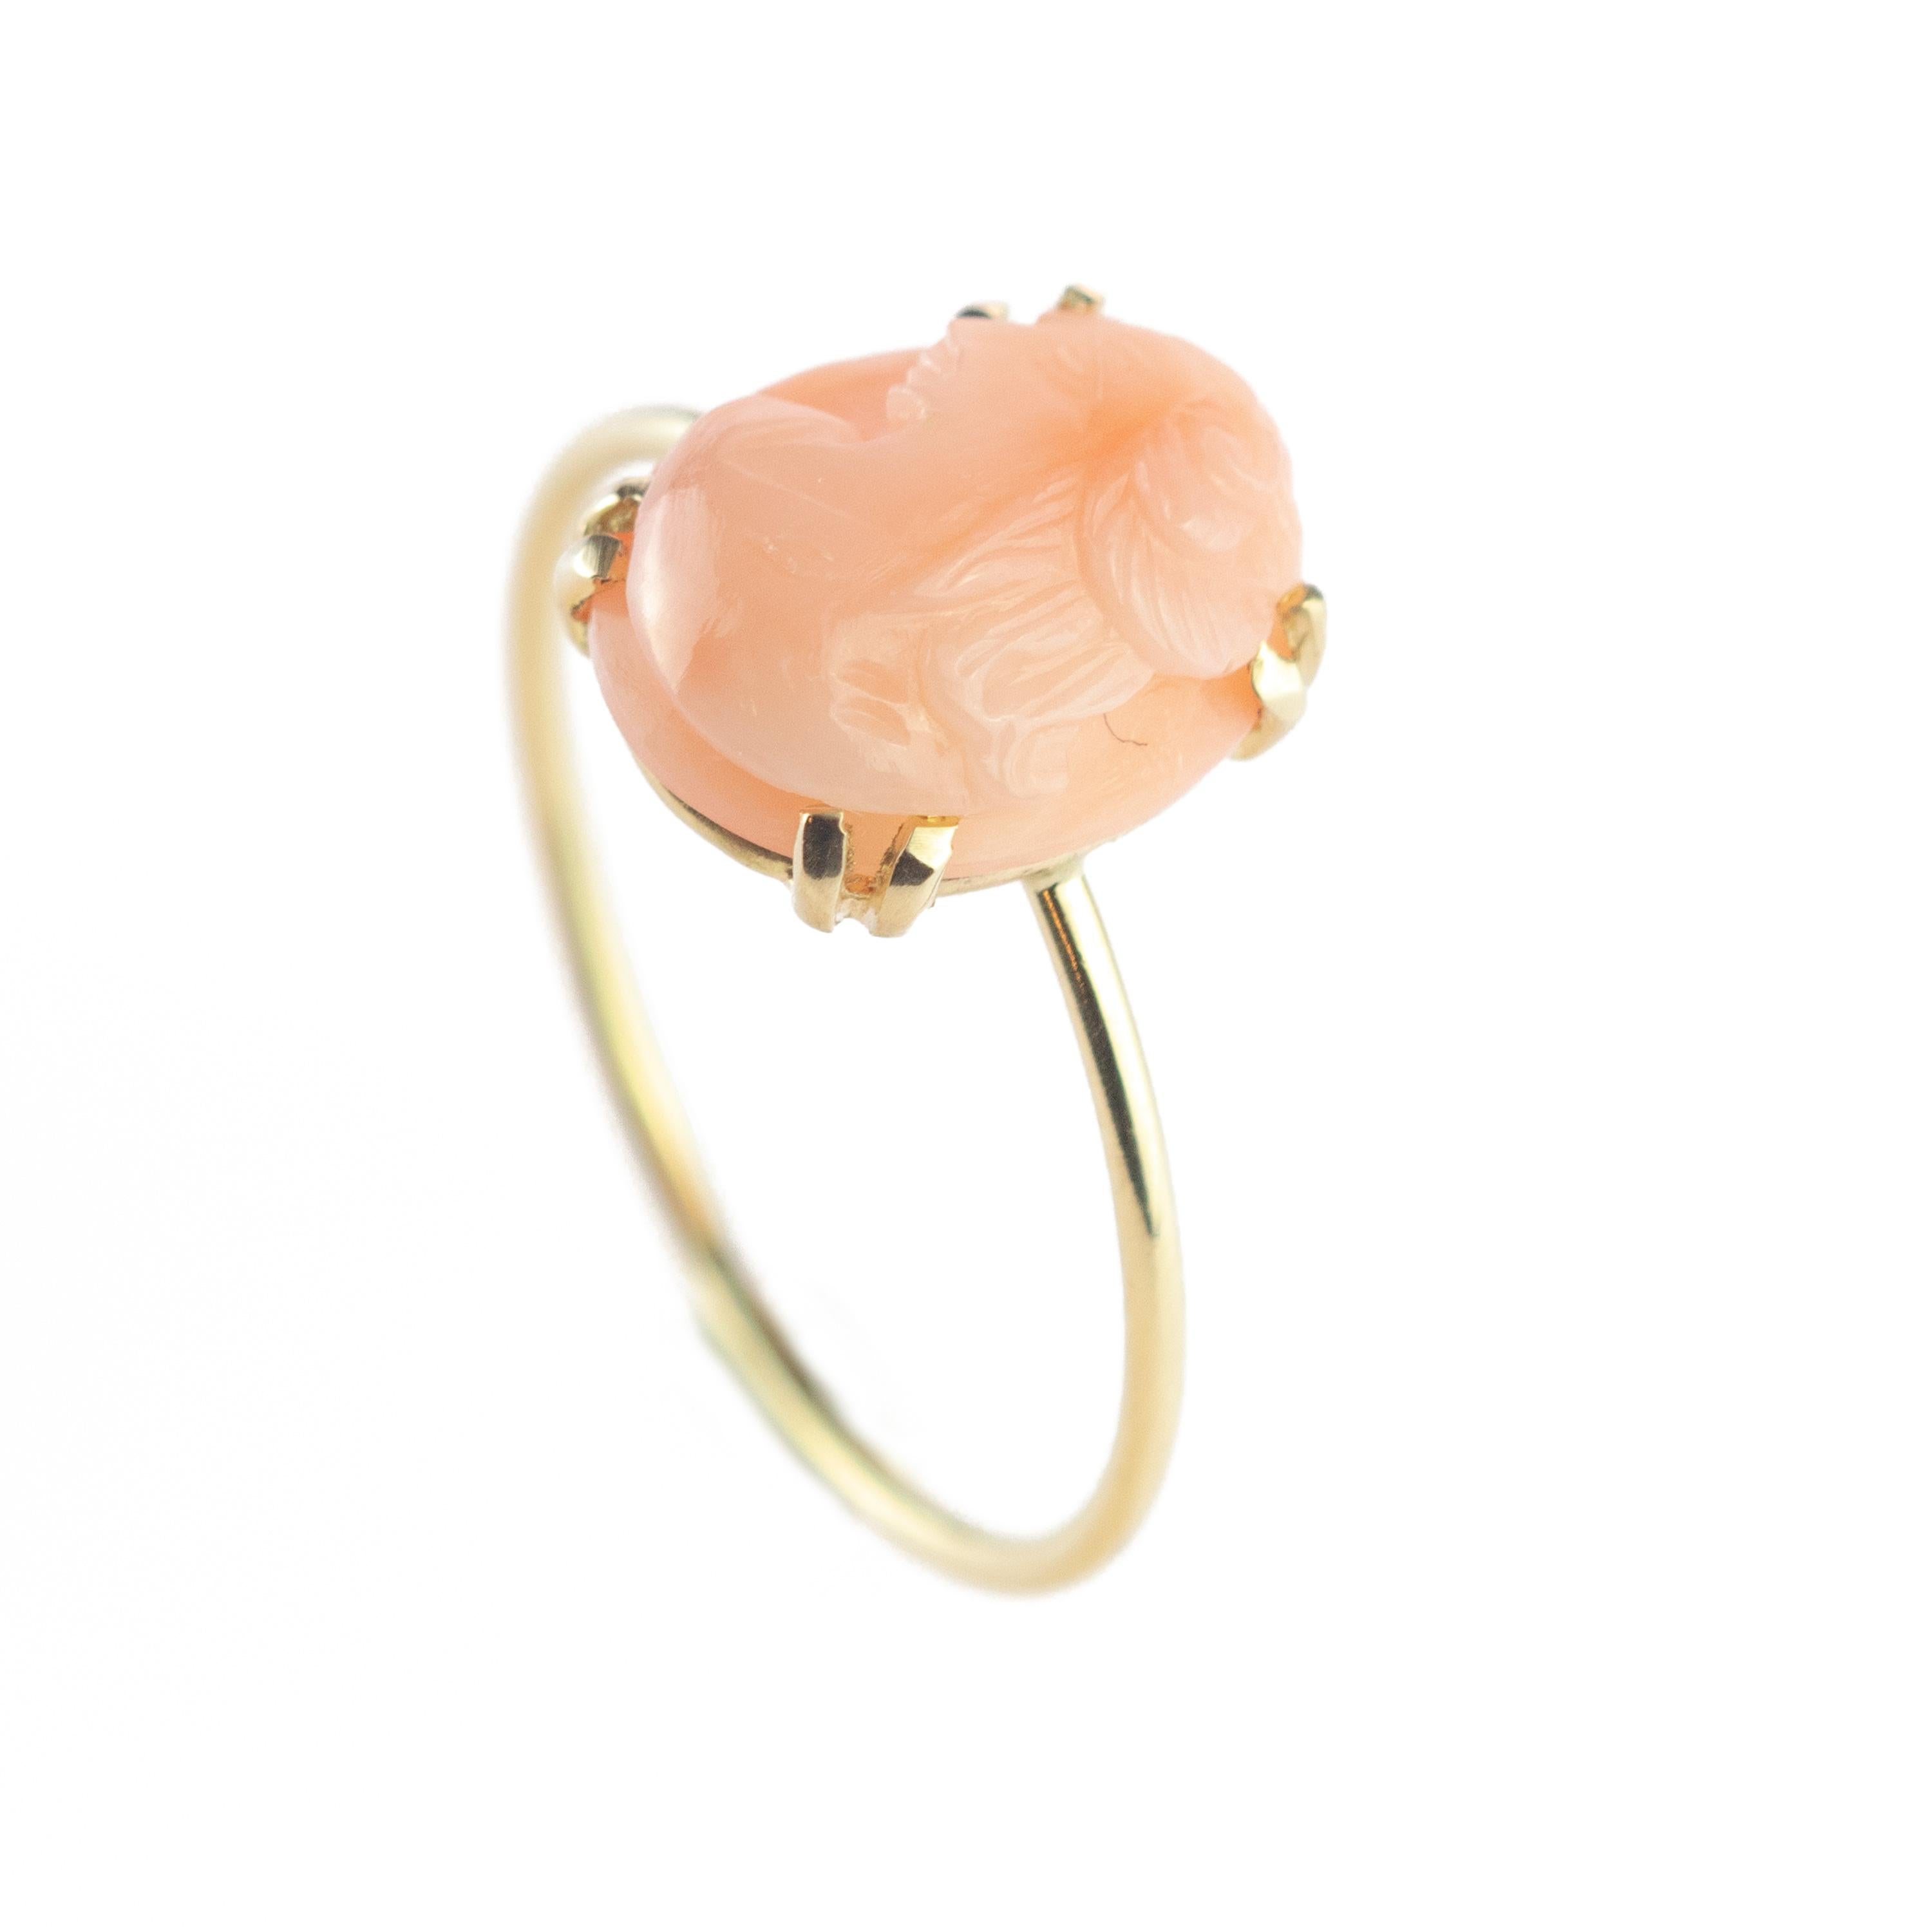 Artisan Intini Jewels 1.5 Carat Pink Cammeo Coral 18 Karat Gold Oval Handmade Chic Ring For Sale